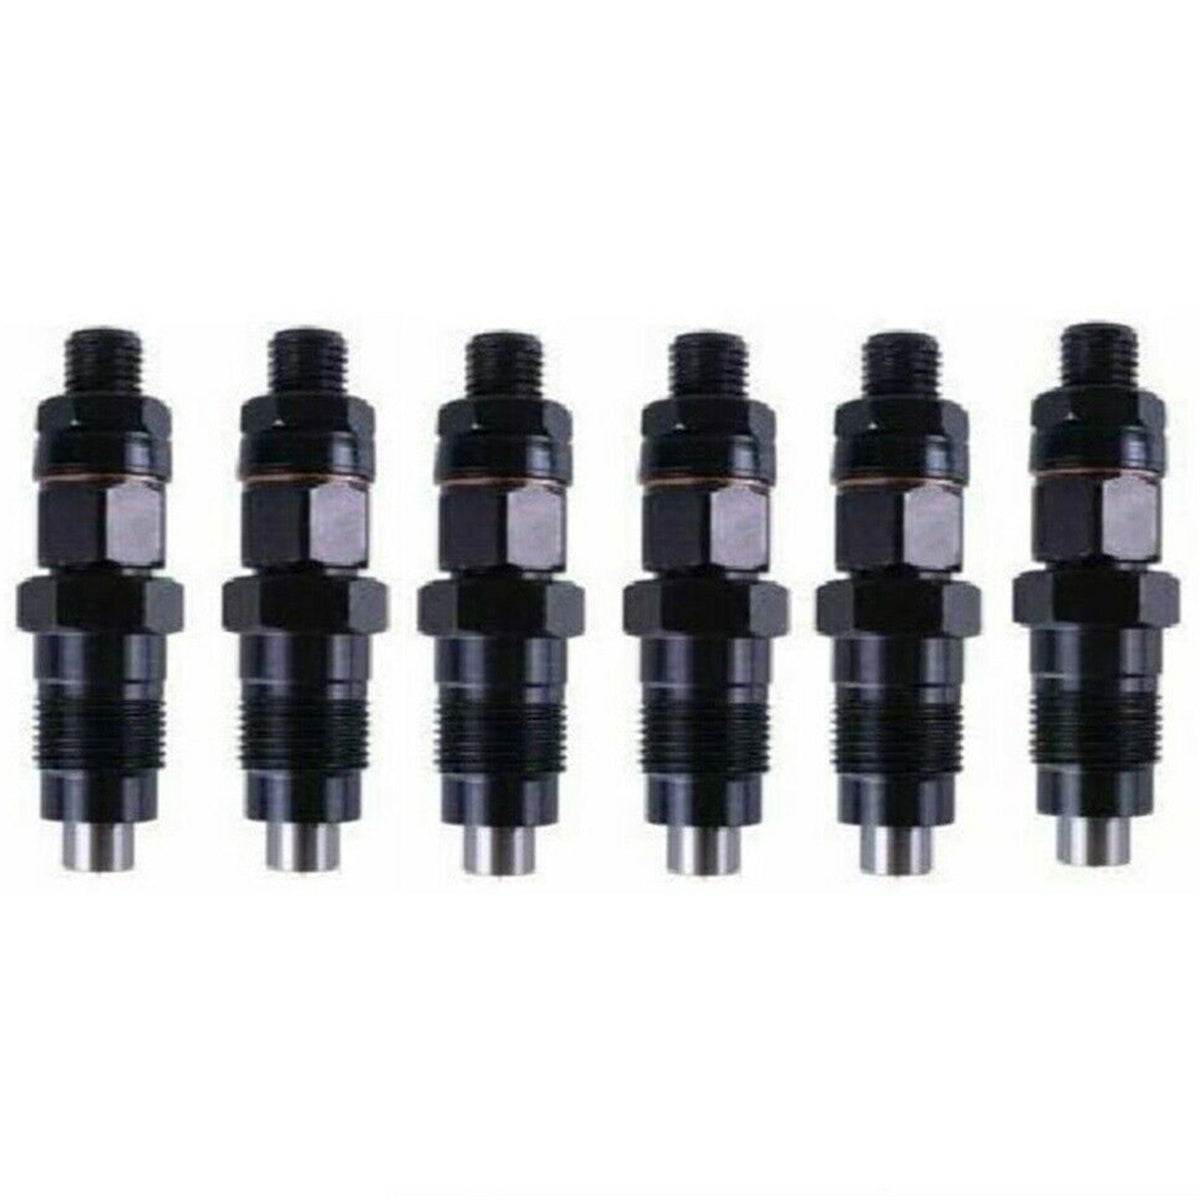 Fuel Injector 093500-7330 23600-19105 for Toyota Landcruiser, Daysyore Fuel Injector, Car Fuel Injector